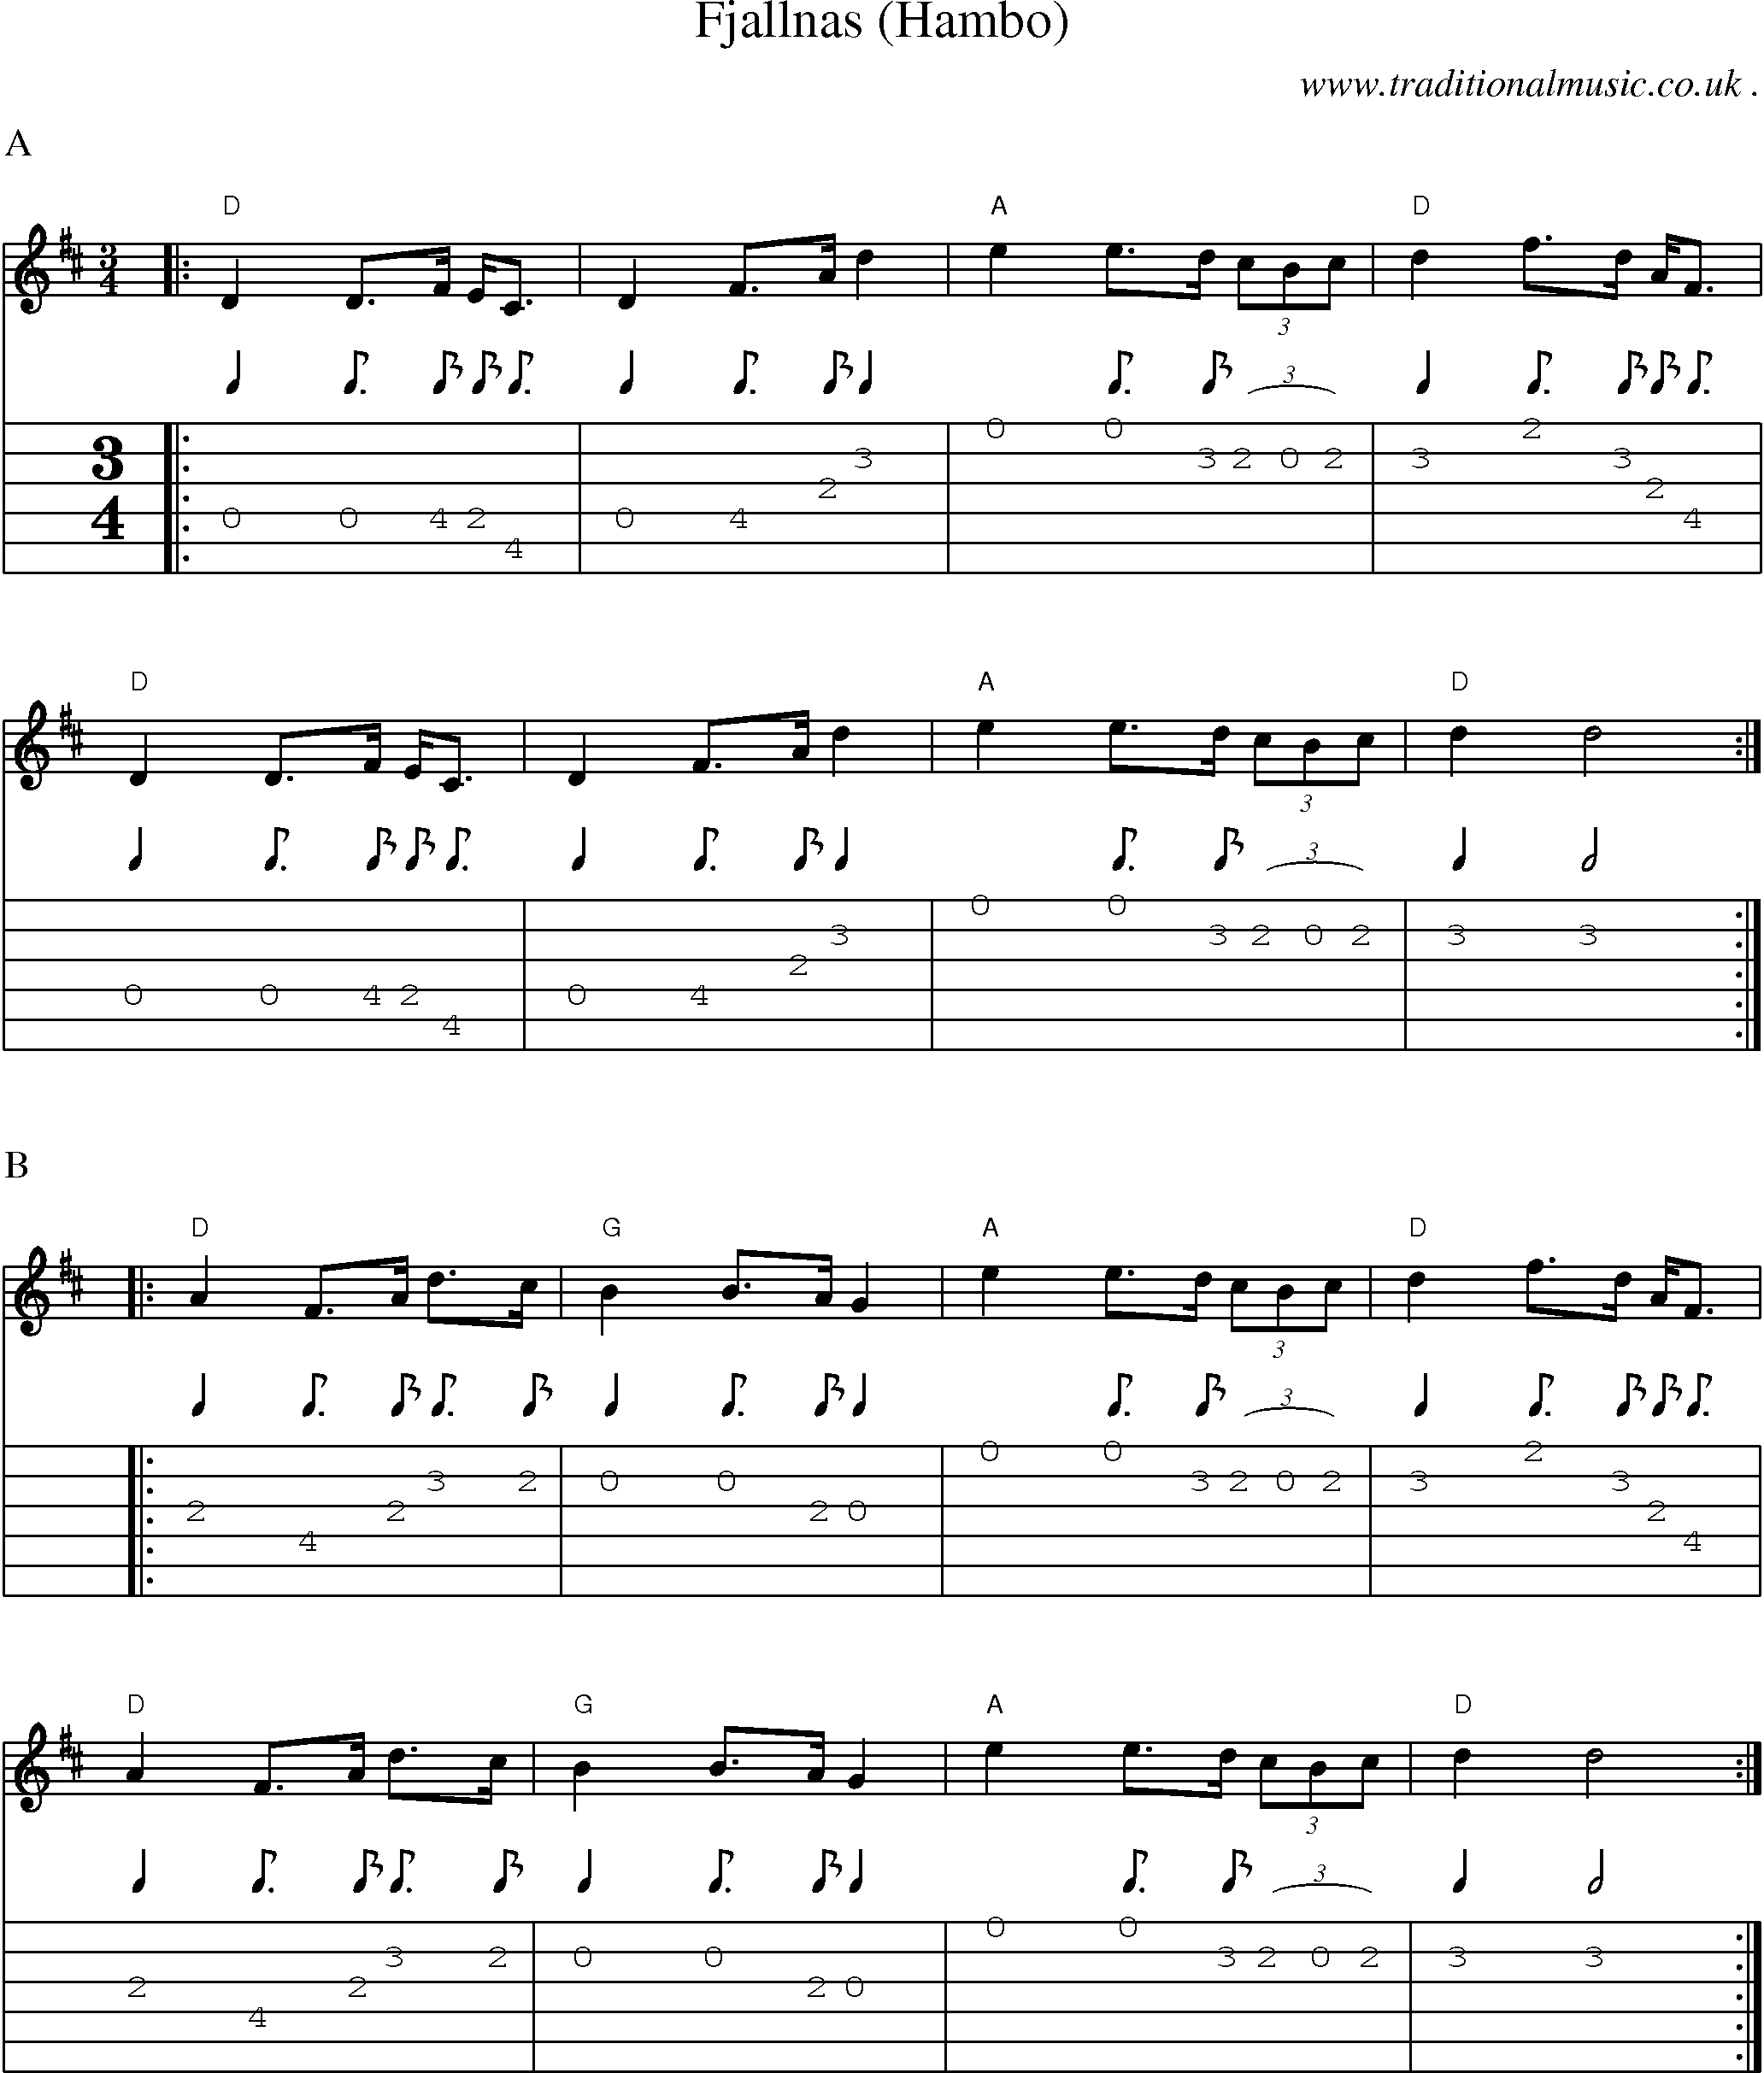 Music Score and Guitar Tabs for Fjallnas (hambo)